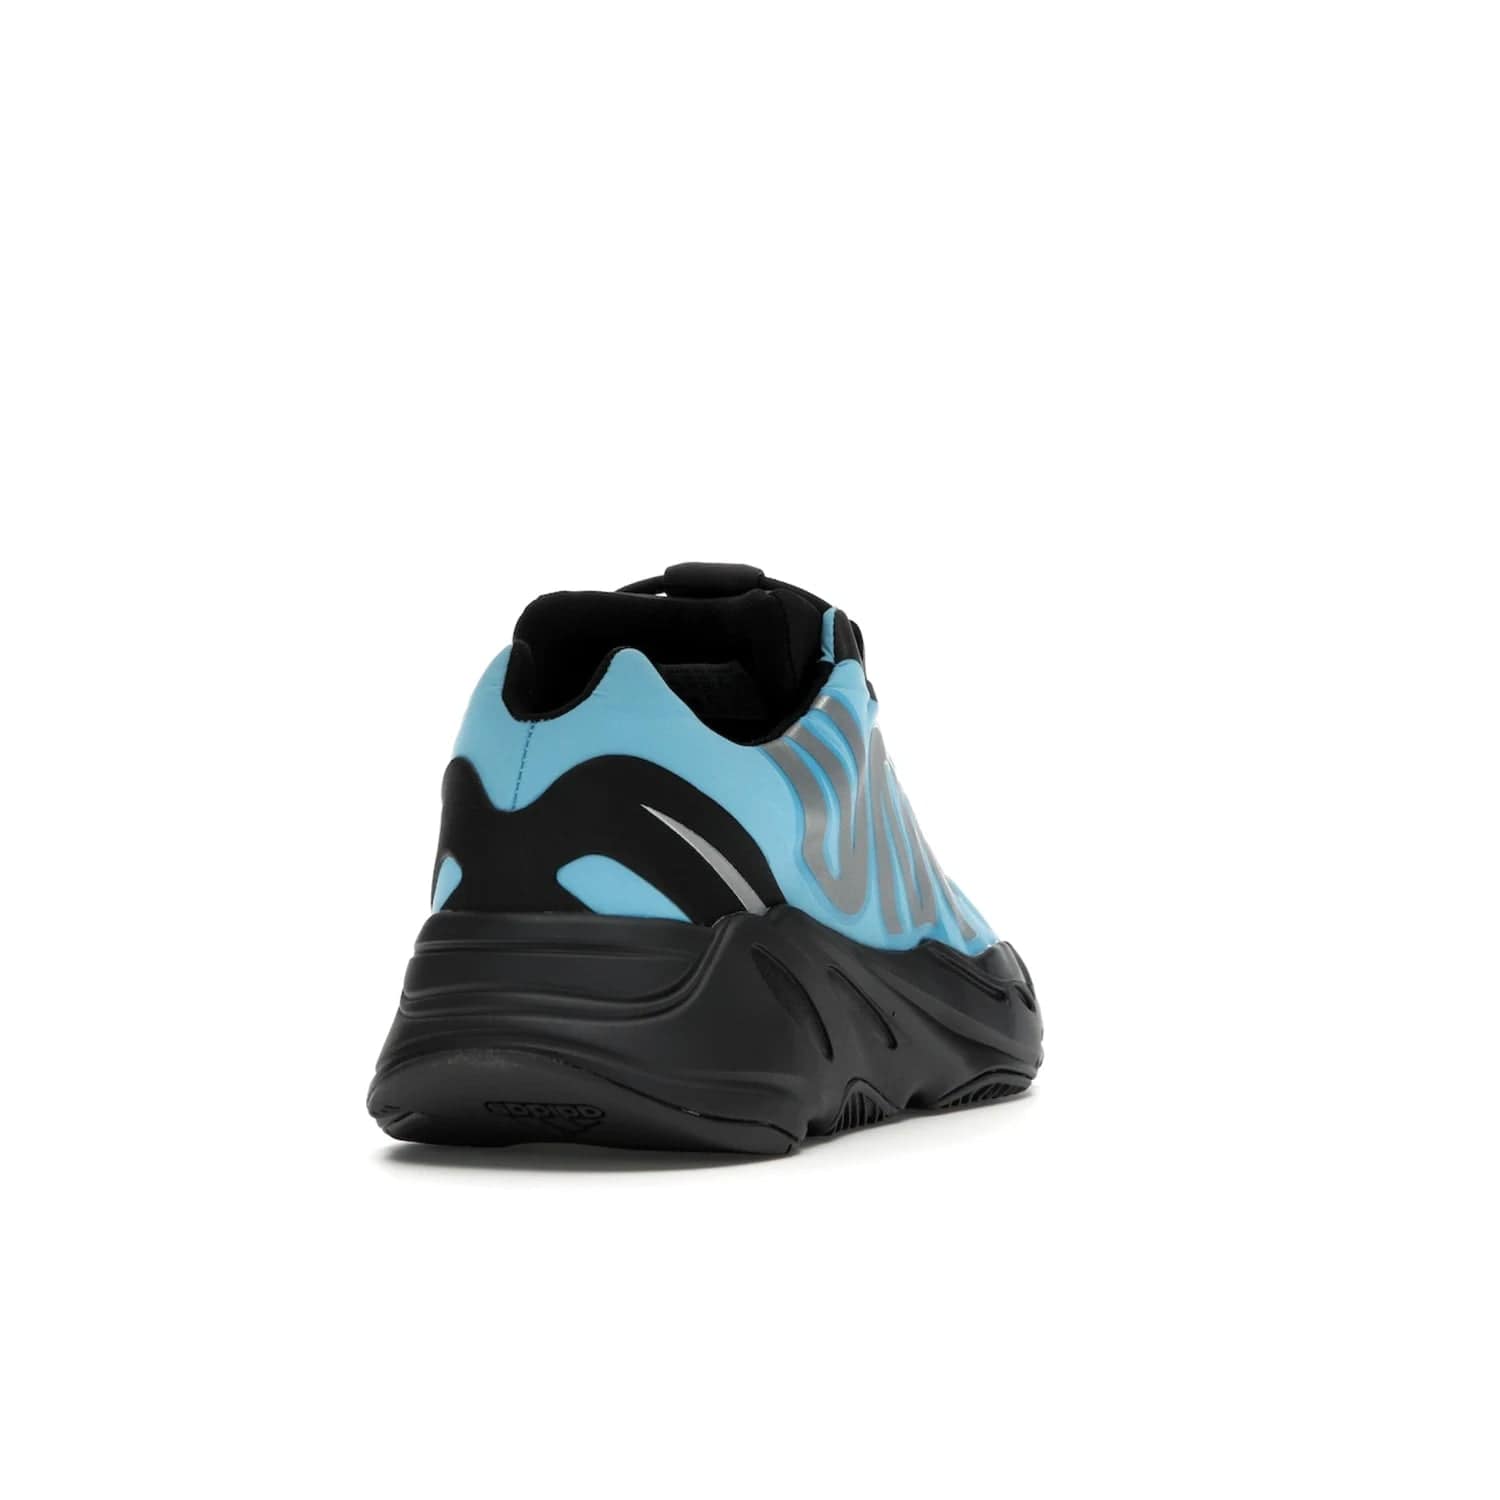 adidas Yeezy Boost 700 MNVN Bright Cyan - Image 30 - Only at www.BallersClubKickz.com - The adidas Yeezy Boost 700 MNVN features a Bright Cyan nylon upper with iconic "700" graphics and a sculptural black Boost sole for superior style and comfort. Step into legendary style and comfort in June 2021.